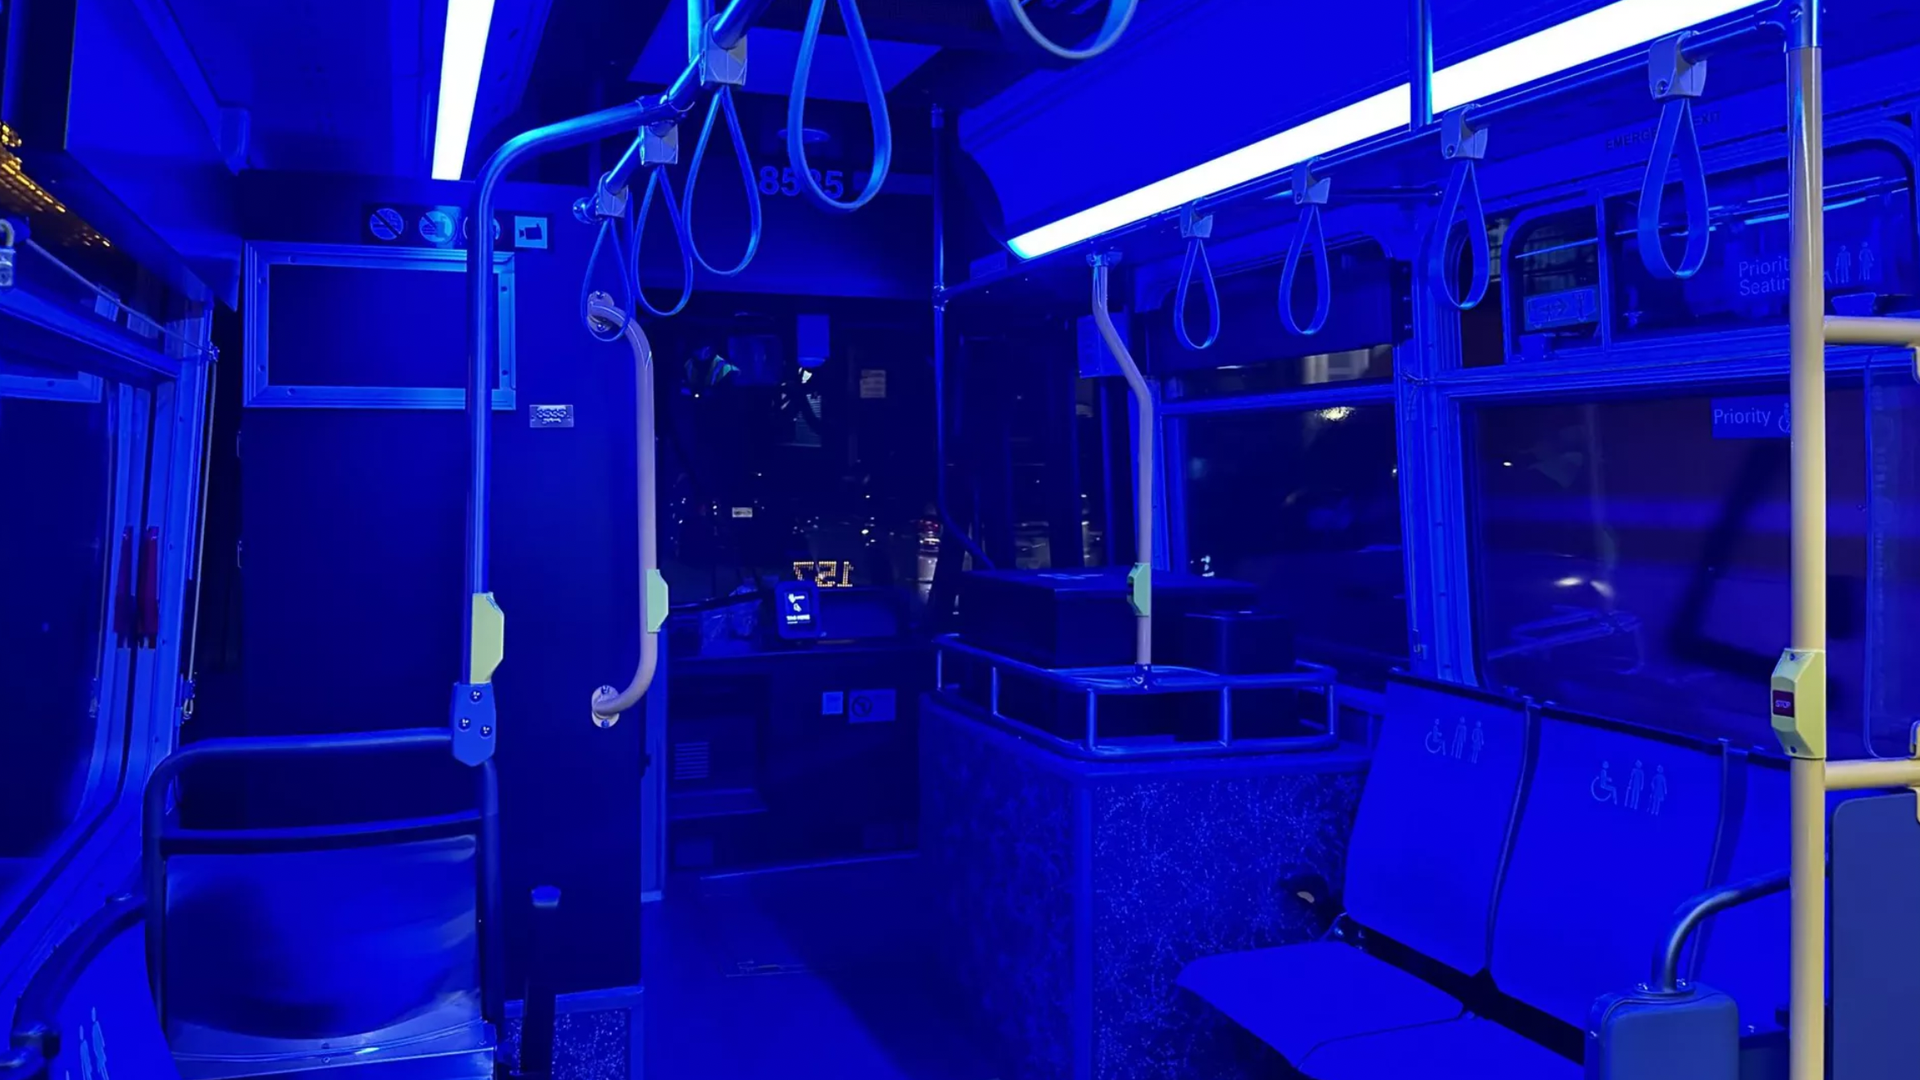 San Francisco's network of fuel-efficient Muni buses with blue lights